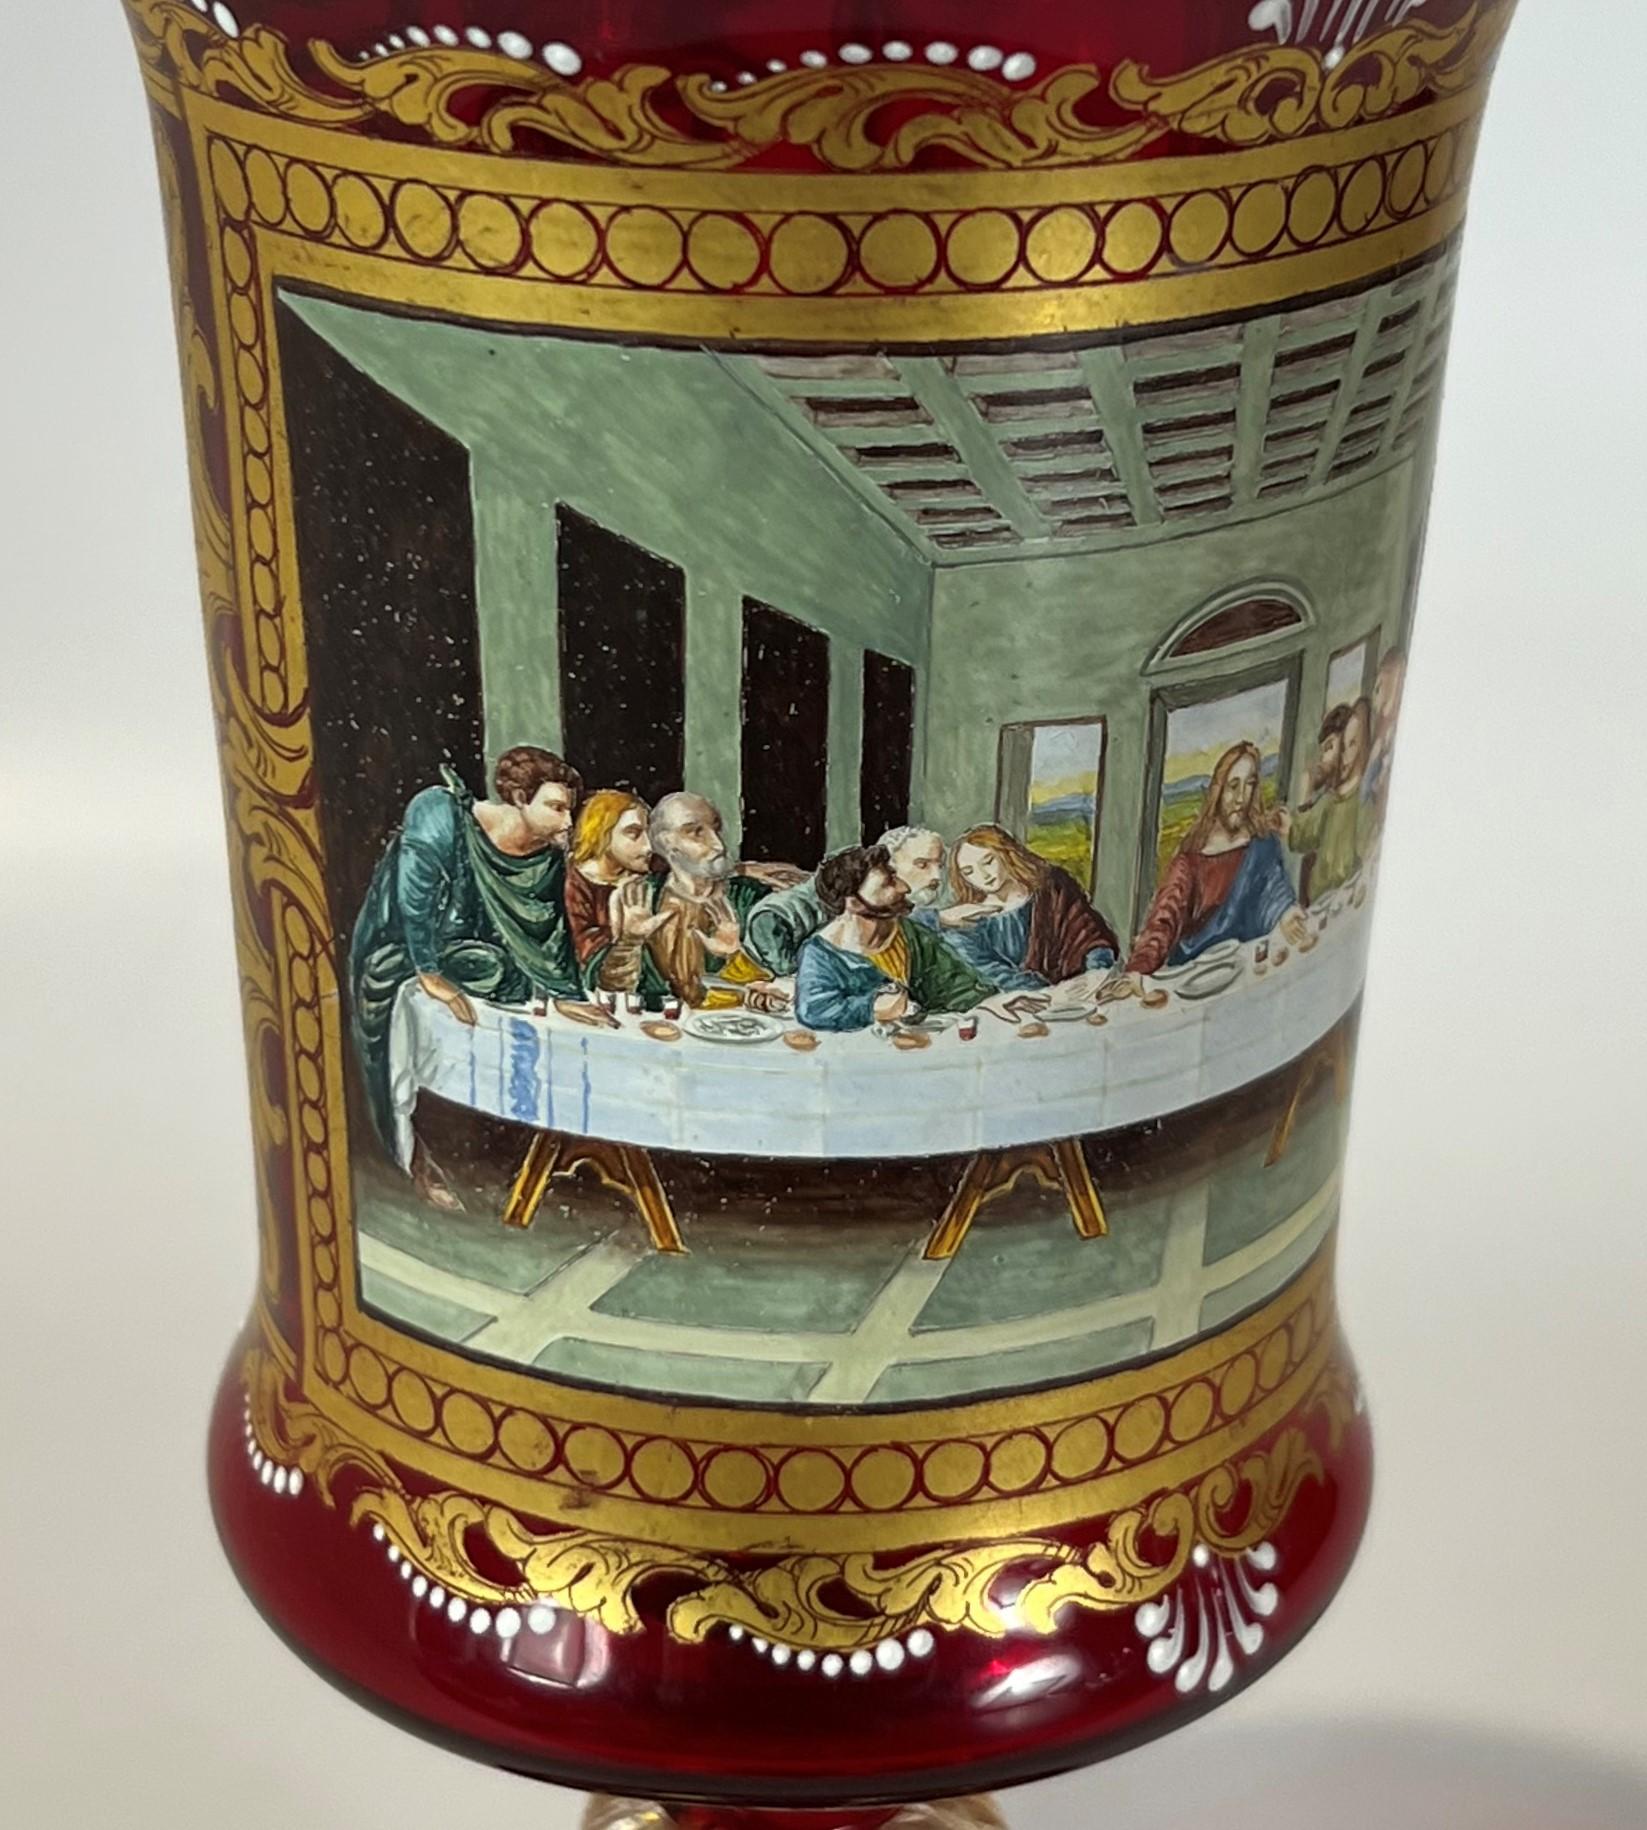 The Last Supper by Leonardo Da Vinci on a Murano ruby red blown glass with aventurine stem goblet. The quality of the Renaissance style painted enamel and depth of surface is extraordinary and well represented in the photos. The Neoclassical and